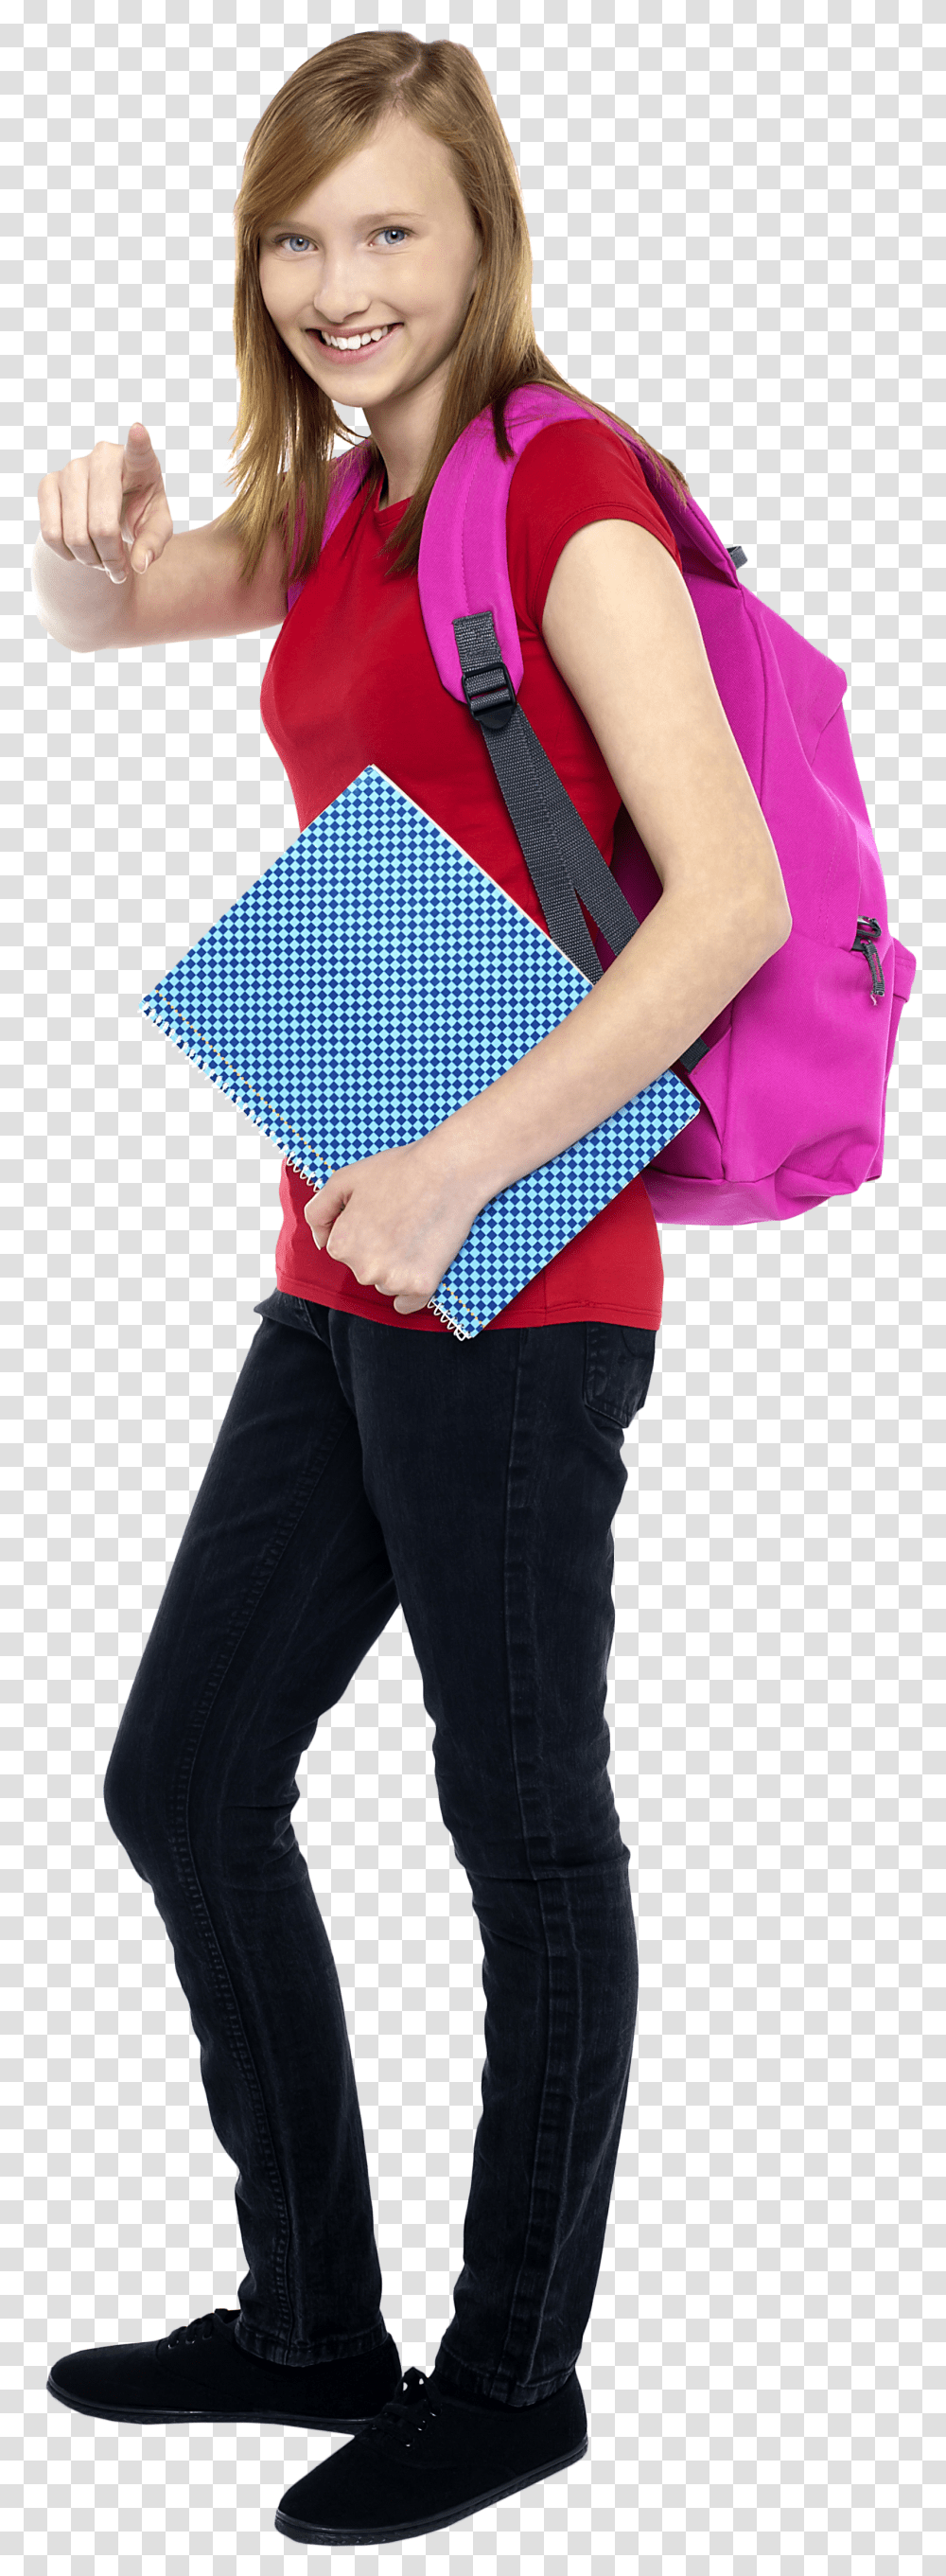 Young Girl Student Image Student College Girl Transparent Png